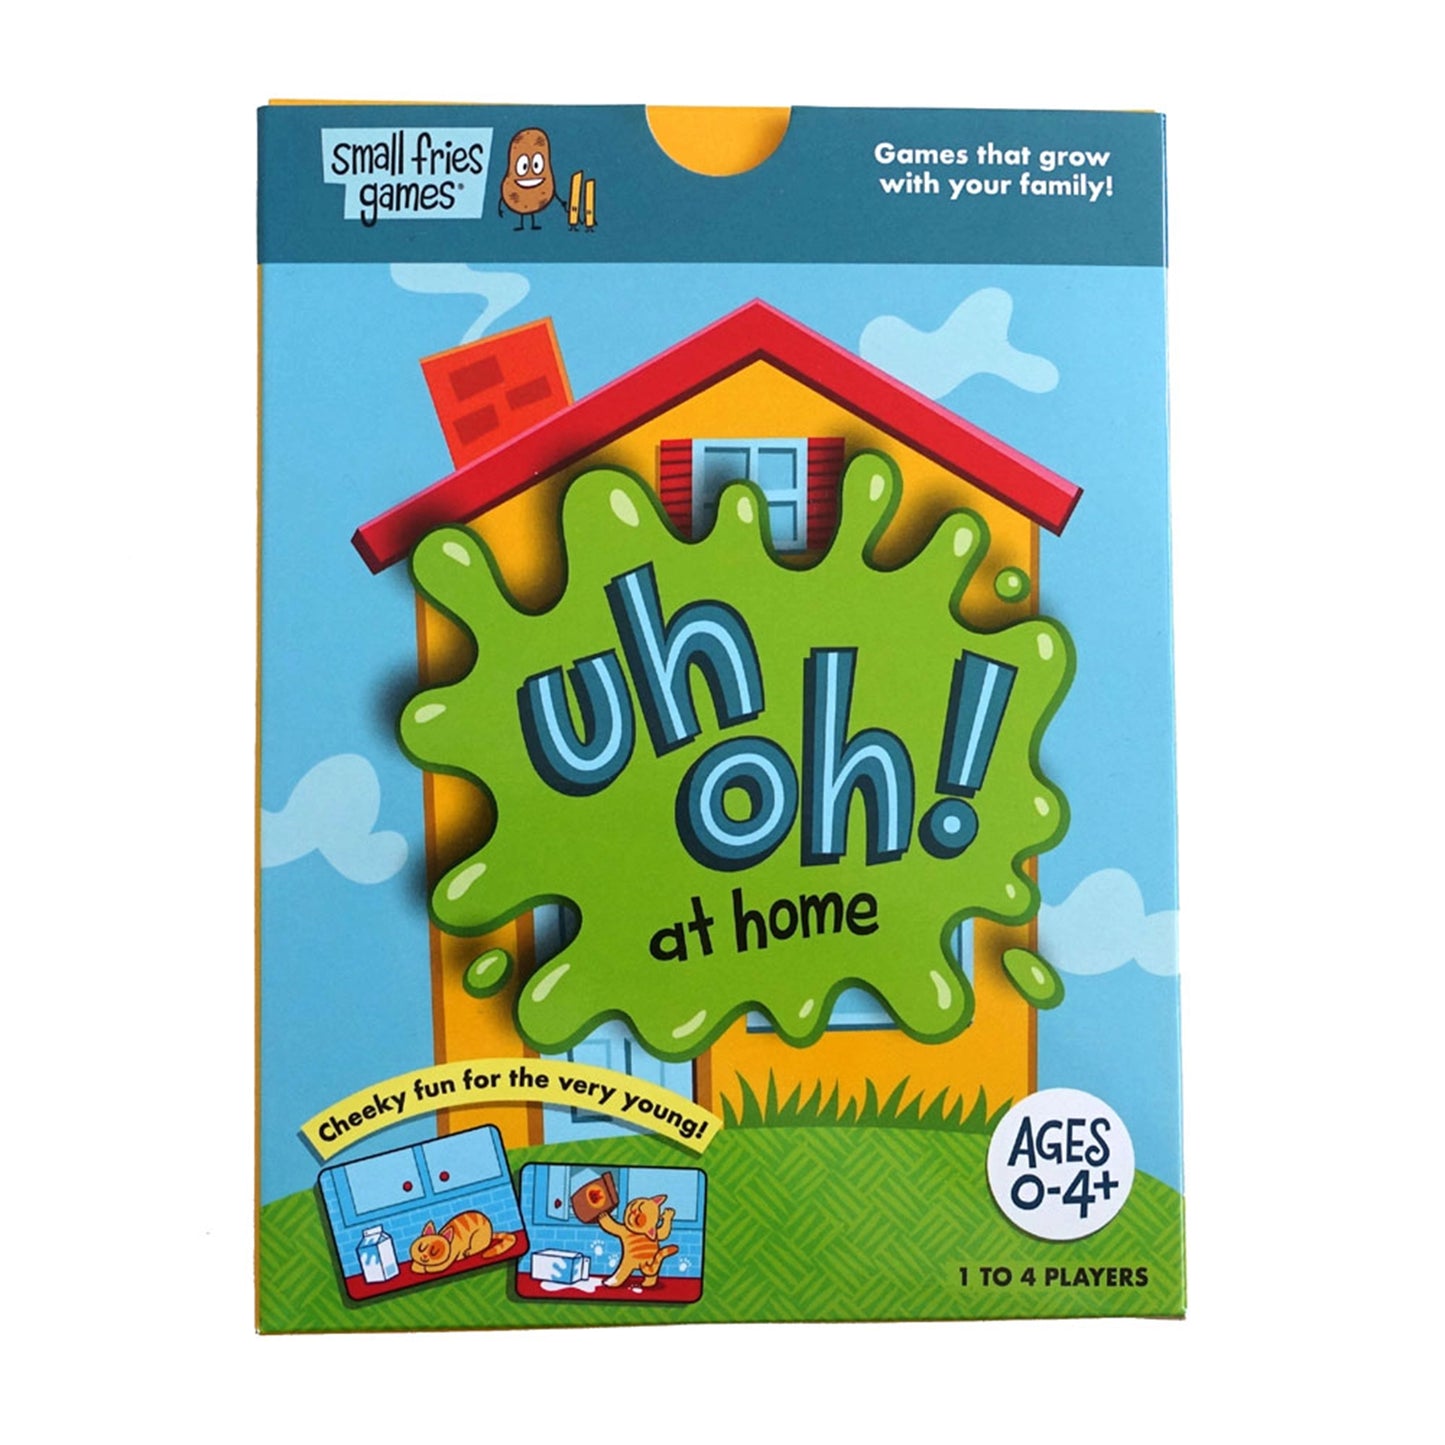 Uh Oh! at home - Small Fries Games - The Forgotten Toy Shop